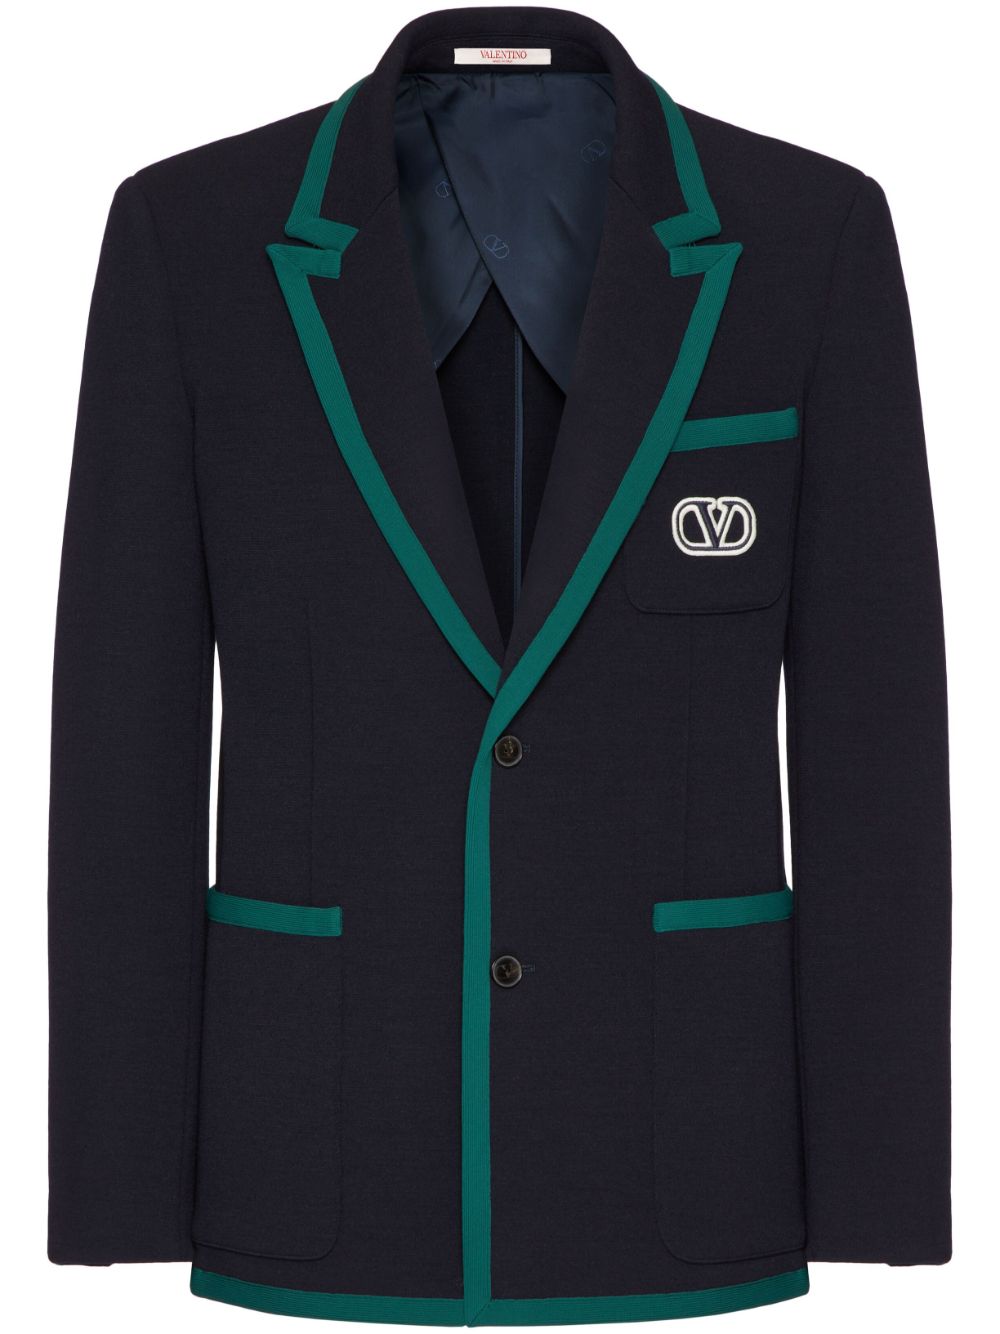 VALENTINO Men's Wool Single-Breasted Blazer with Contrasting Trimmings and Lapel Collar